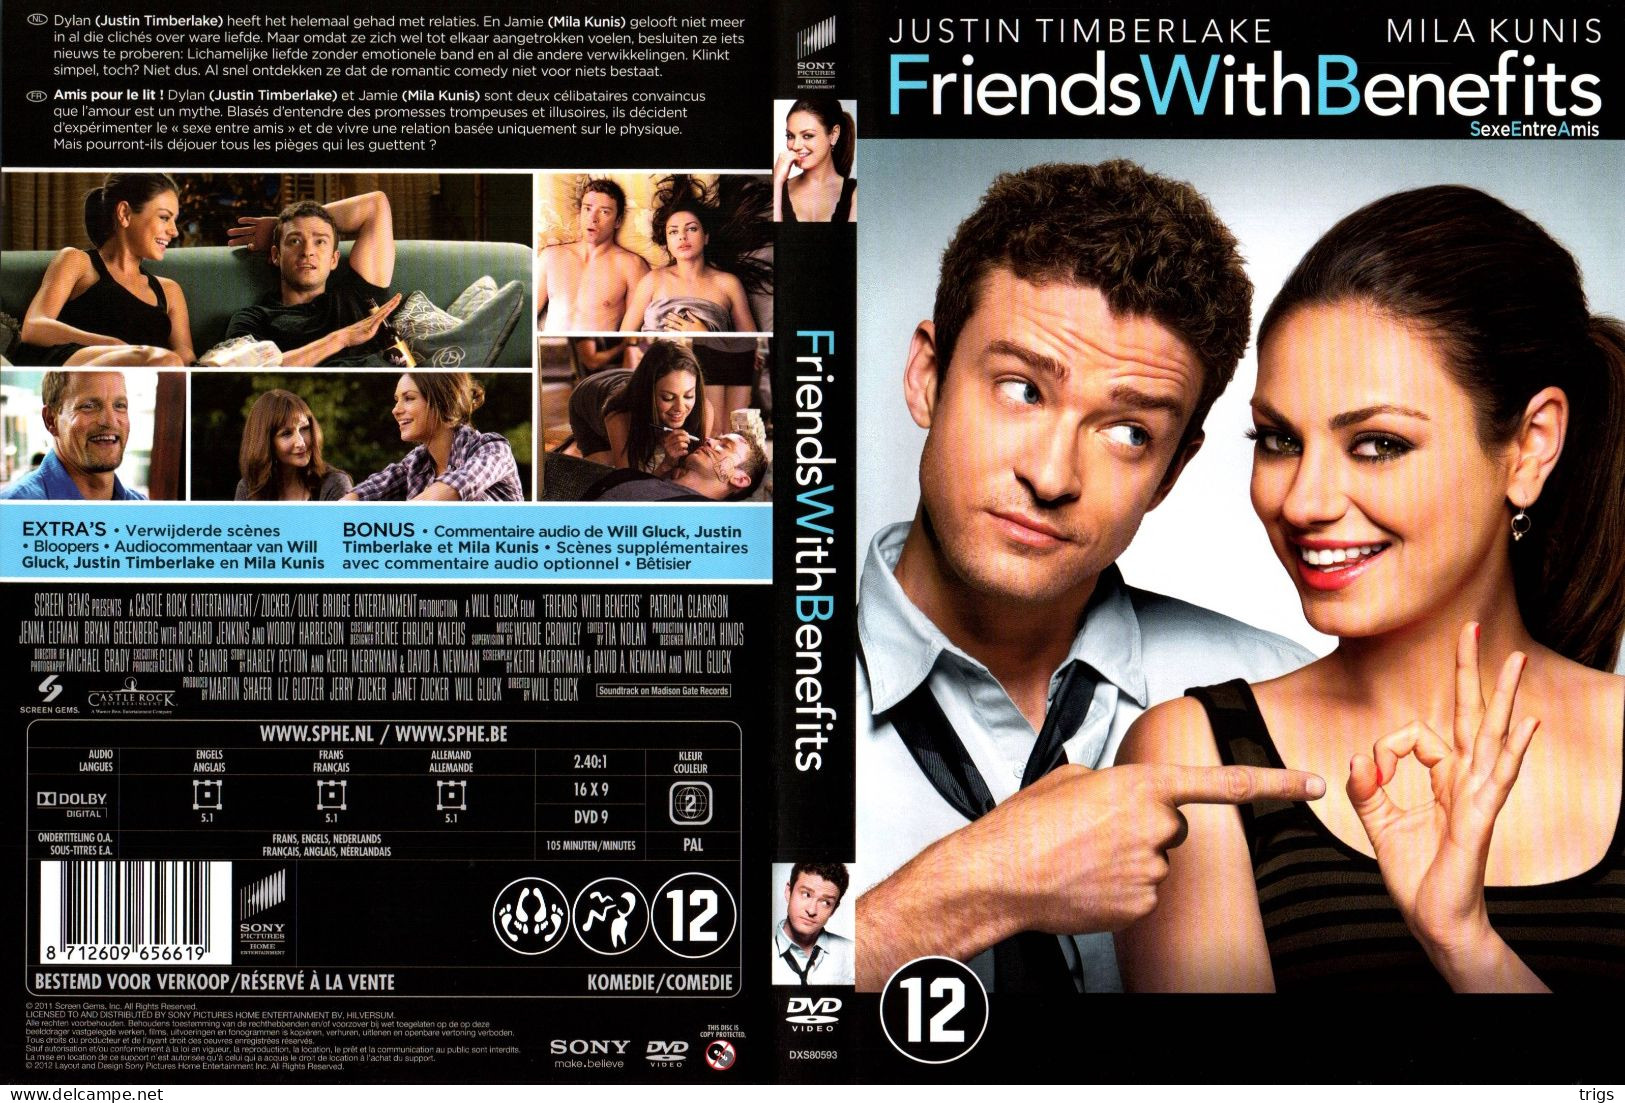 DVD - Friends With Benefits - Commedia